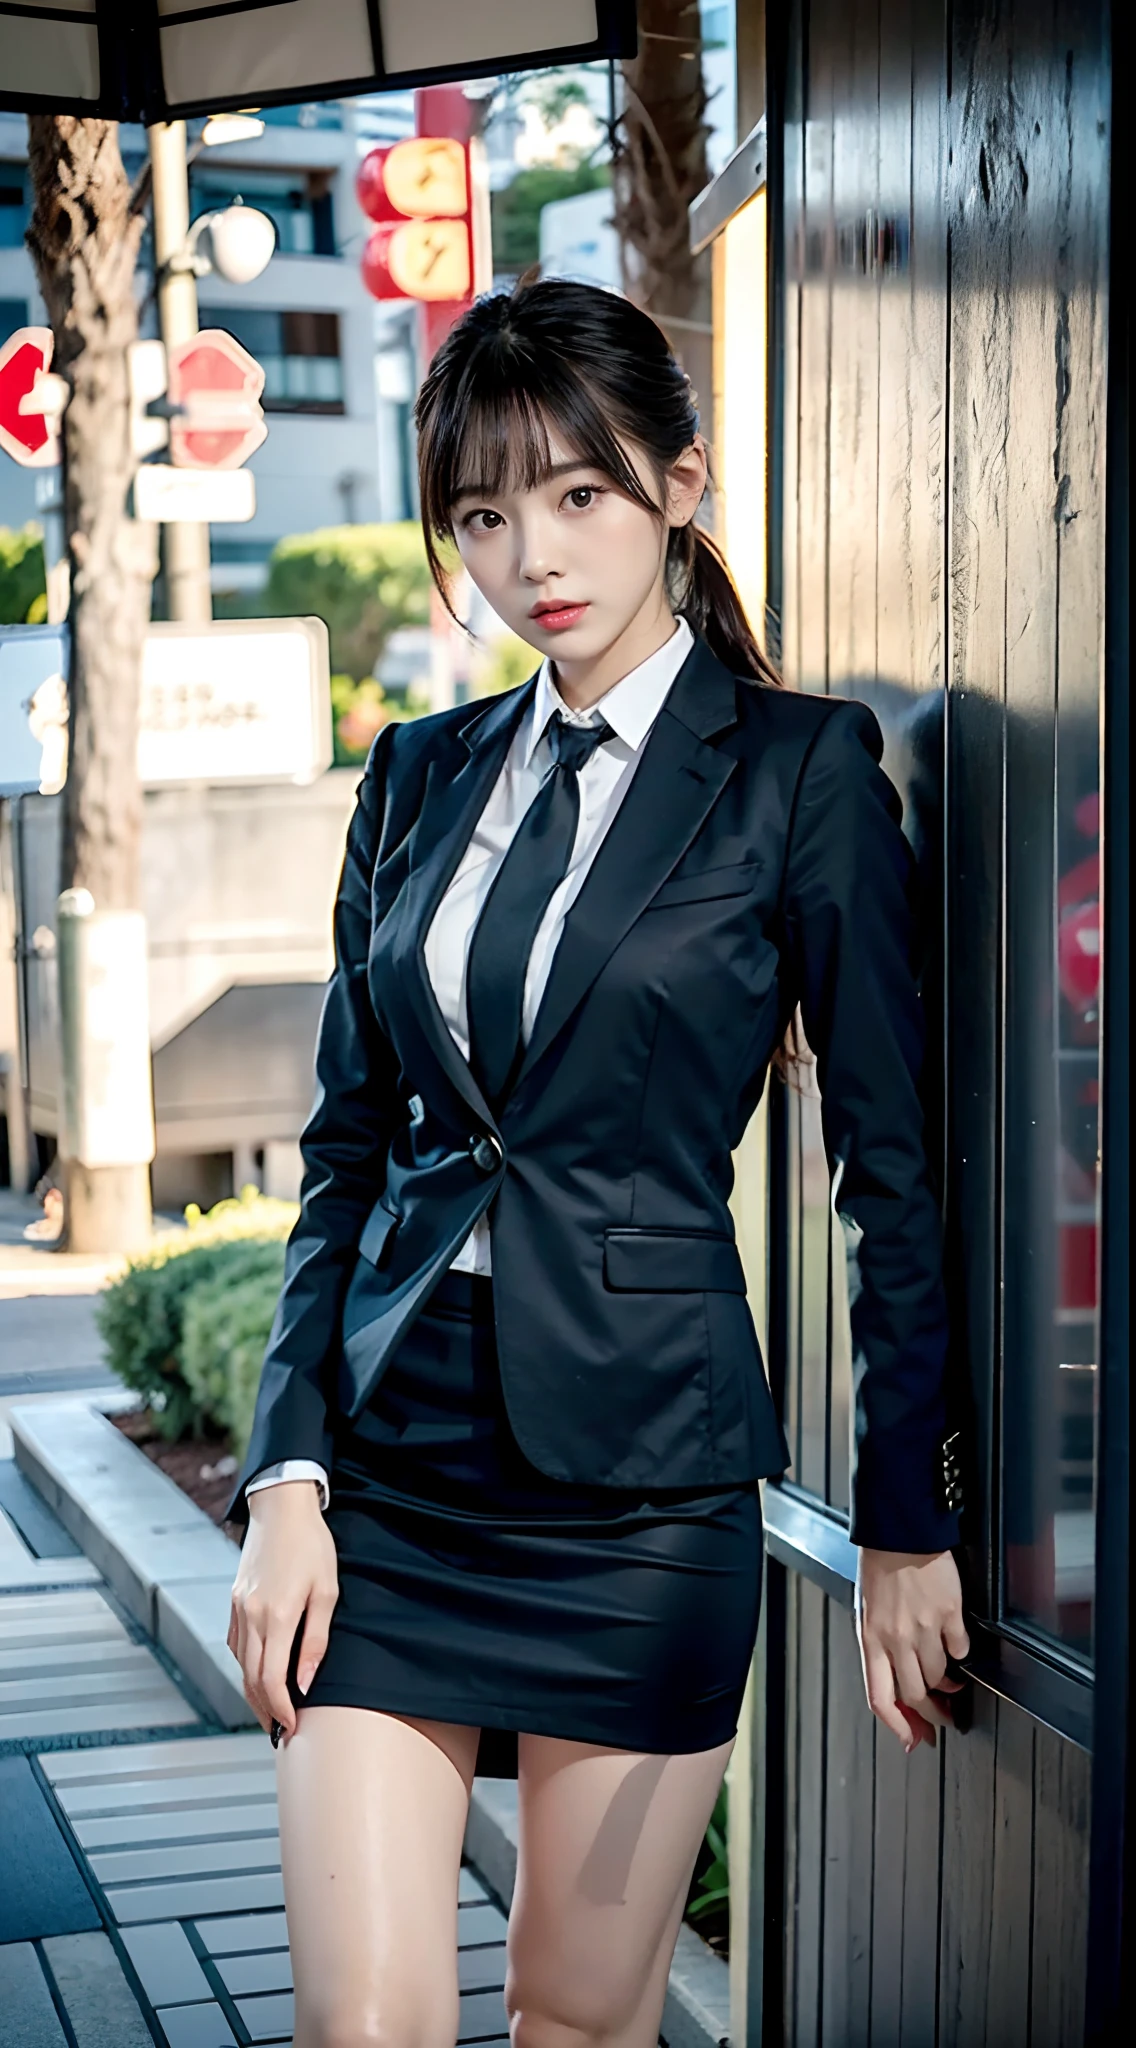 1 Girl, (Watch Viewer), (Bokeh: 1.1), Parted Lips, Expressionless, Realistic, Black Tight Mini Skirt,
business suit, OL, thin thighs, small buttocks, beautiful legs, delicate, Japan fashion model, thin face,
Best quality, (photorealistic: 1.4), ultra high resolution, big mini skirt, black suit and tie woman, suit girl, suit girl, strict business suit wearing, business suit wearing, business suit wearing, black business suit wearing, Japan woman fashion model, black business suit wearing, fashion suit wearing black suit wearing black noble suit, Business suit wearing, black slim clothes, woman posing for photo, beautiful Japan girl face, asian beautiful face, young cute one asian face, beautiful asian girl, girl cute little face, beautiful young korean woman, Japan facial features, young adorable korean face, gorgeous young korean woman, young asian girl, beautiful korean woman, Beautiful asian young woman, standing facing forward, composition visible from above knees to head, knees visible, camera gaze, standing, full body shot, hyperrealistic, front shot full body, bare feet, (face only LoRA applied, bare feet)